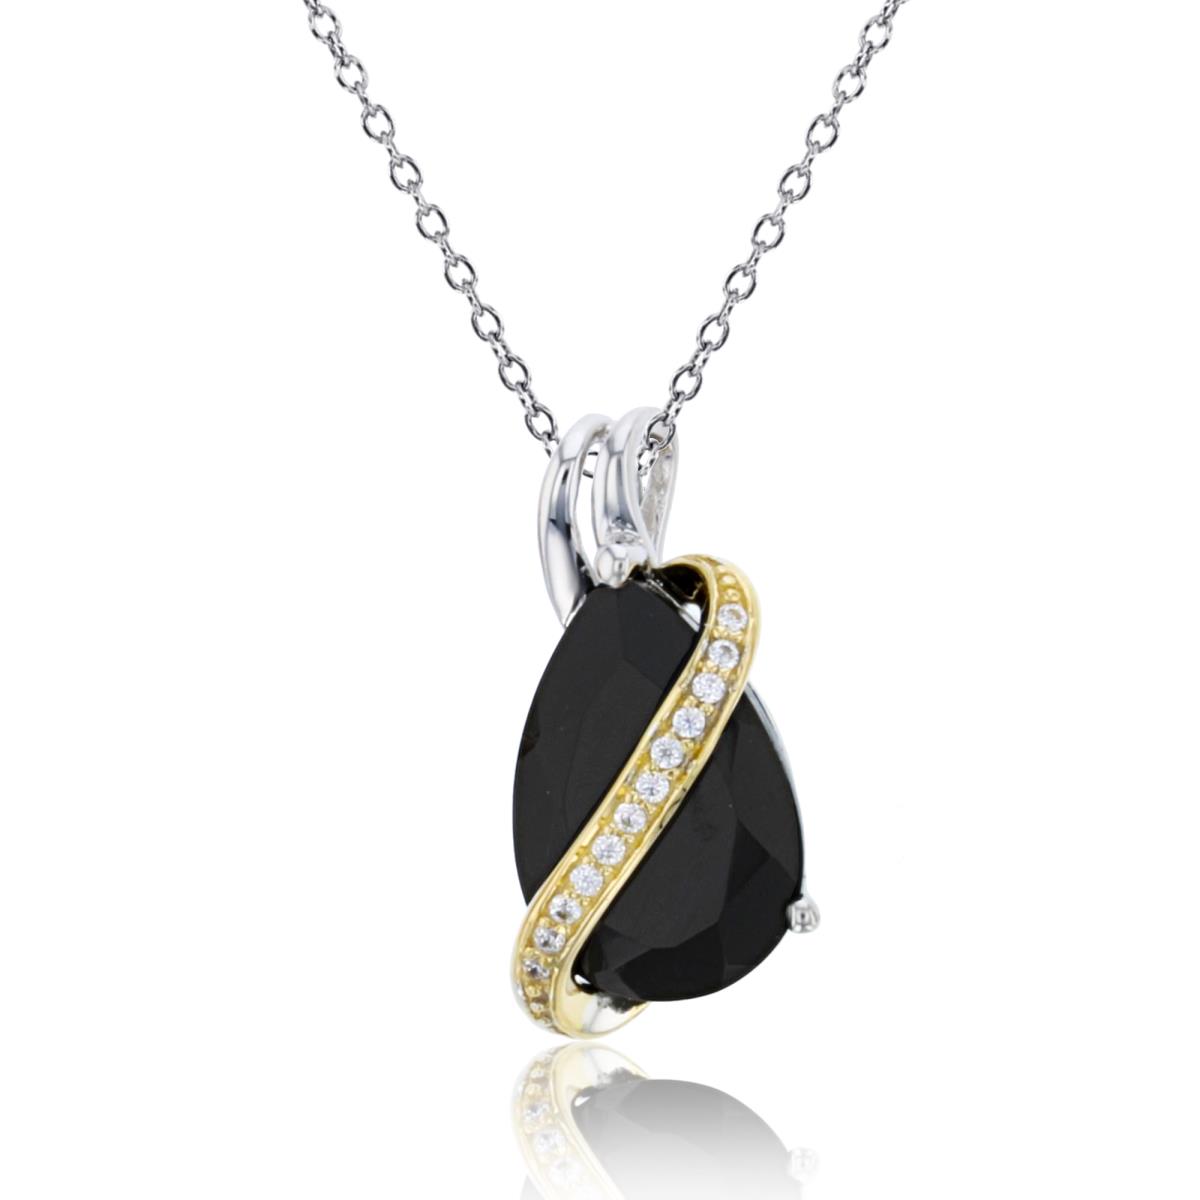 14K Yellow Gold & Sterling Silver Rnd CZ Row Over 12x8mm PS Onyx 18"Necklace